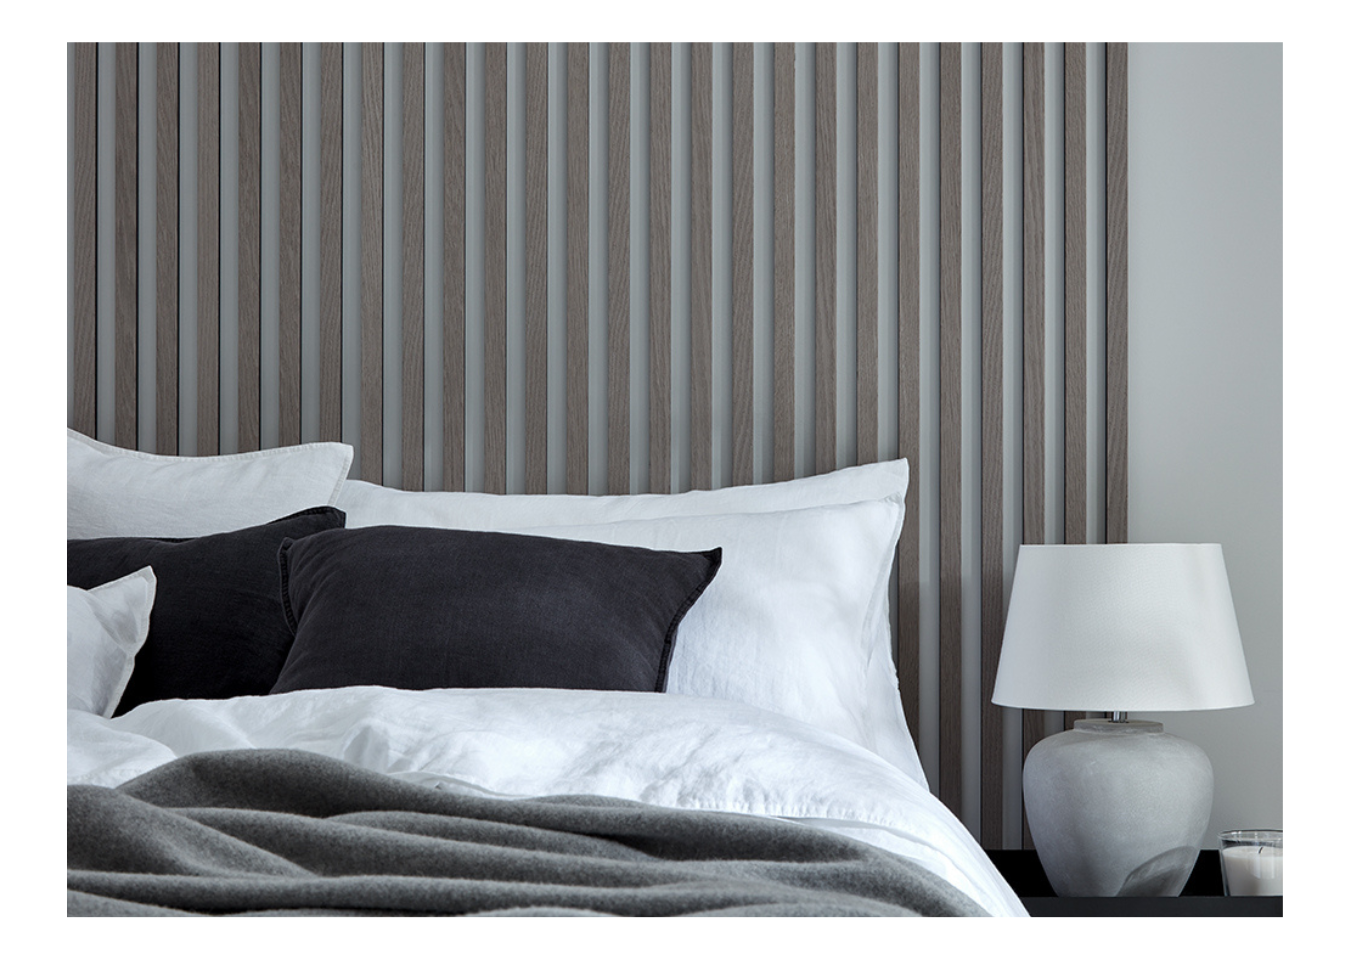 SlatWall Grey Oak wooden wall slats behind a white bed with black cushions and a grey blanket, next to a grey and white lamp.